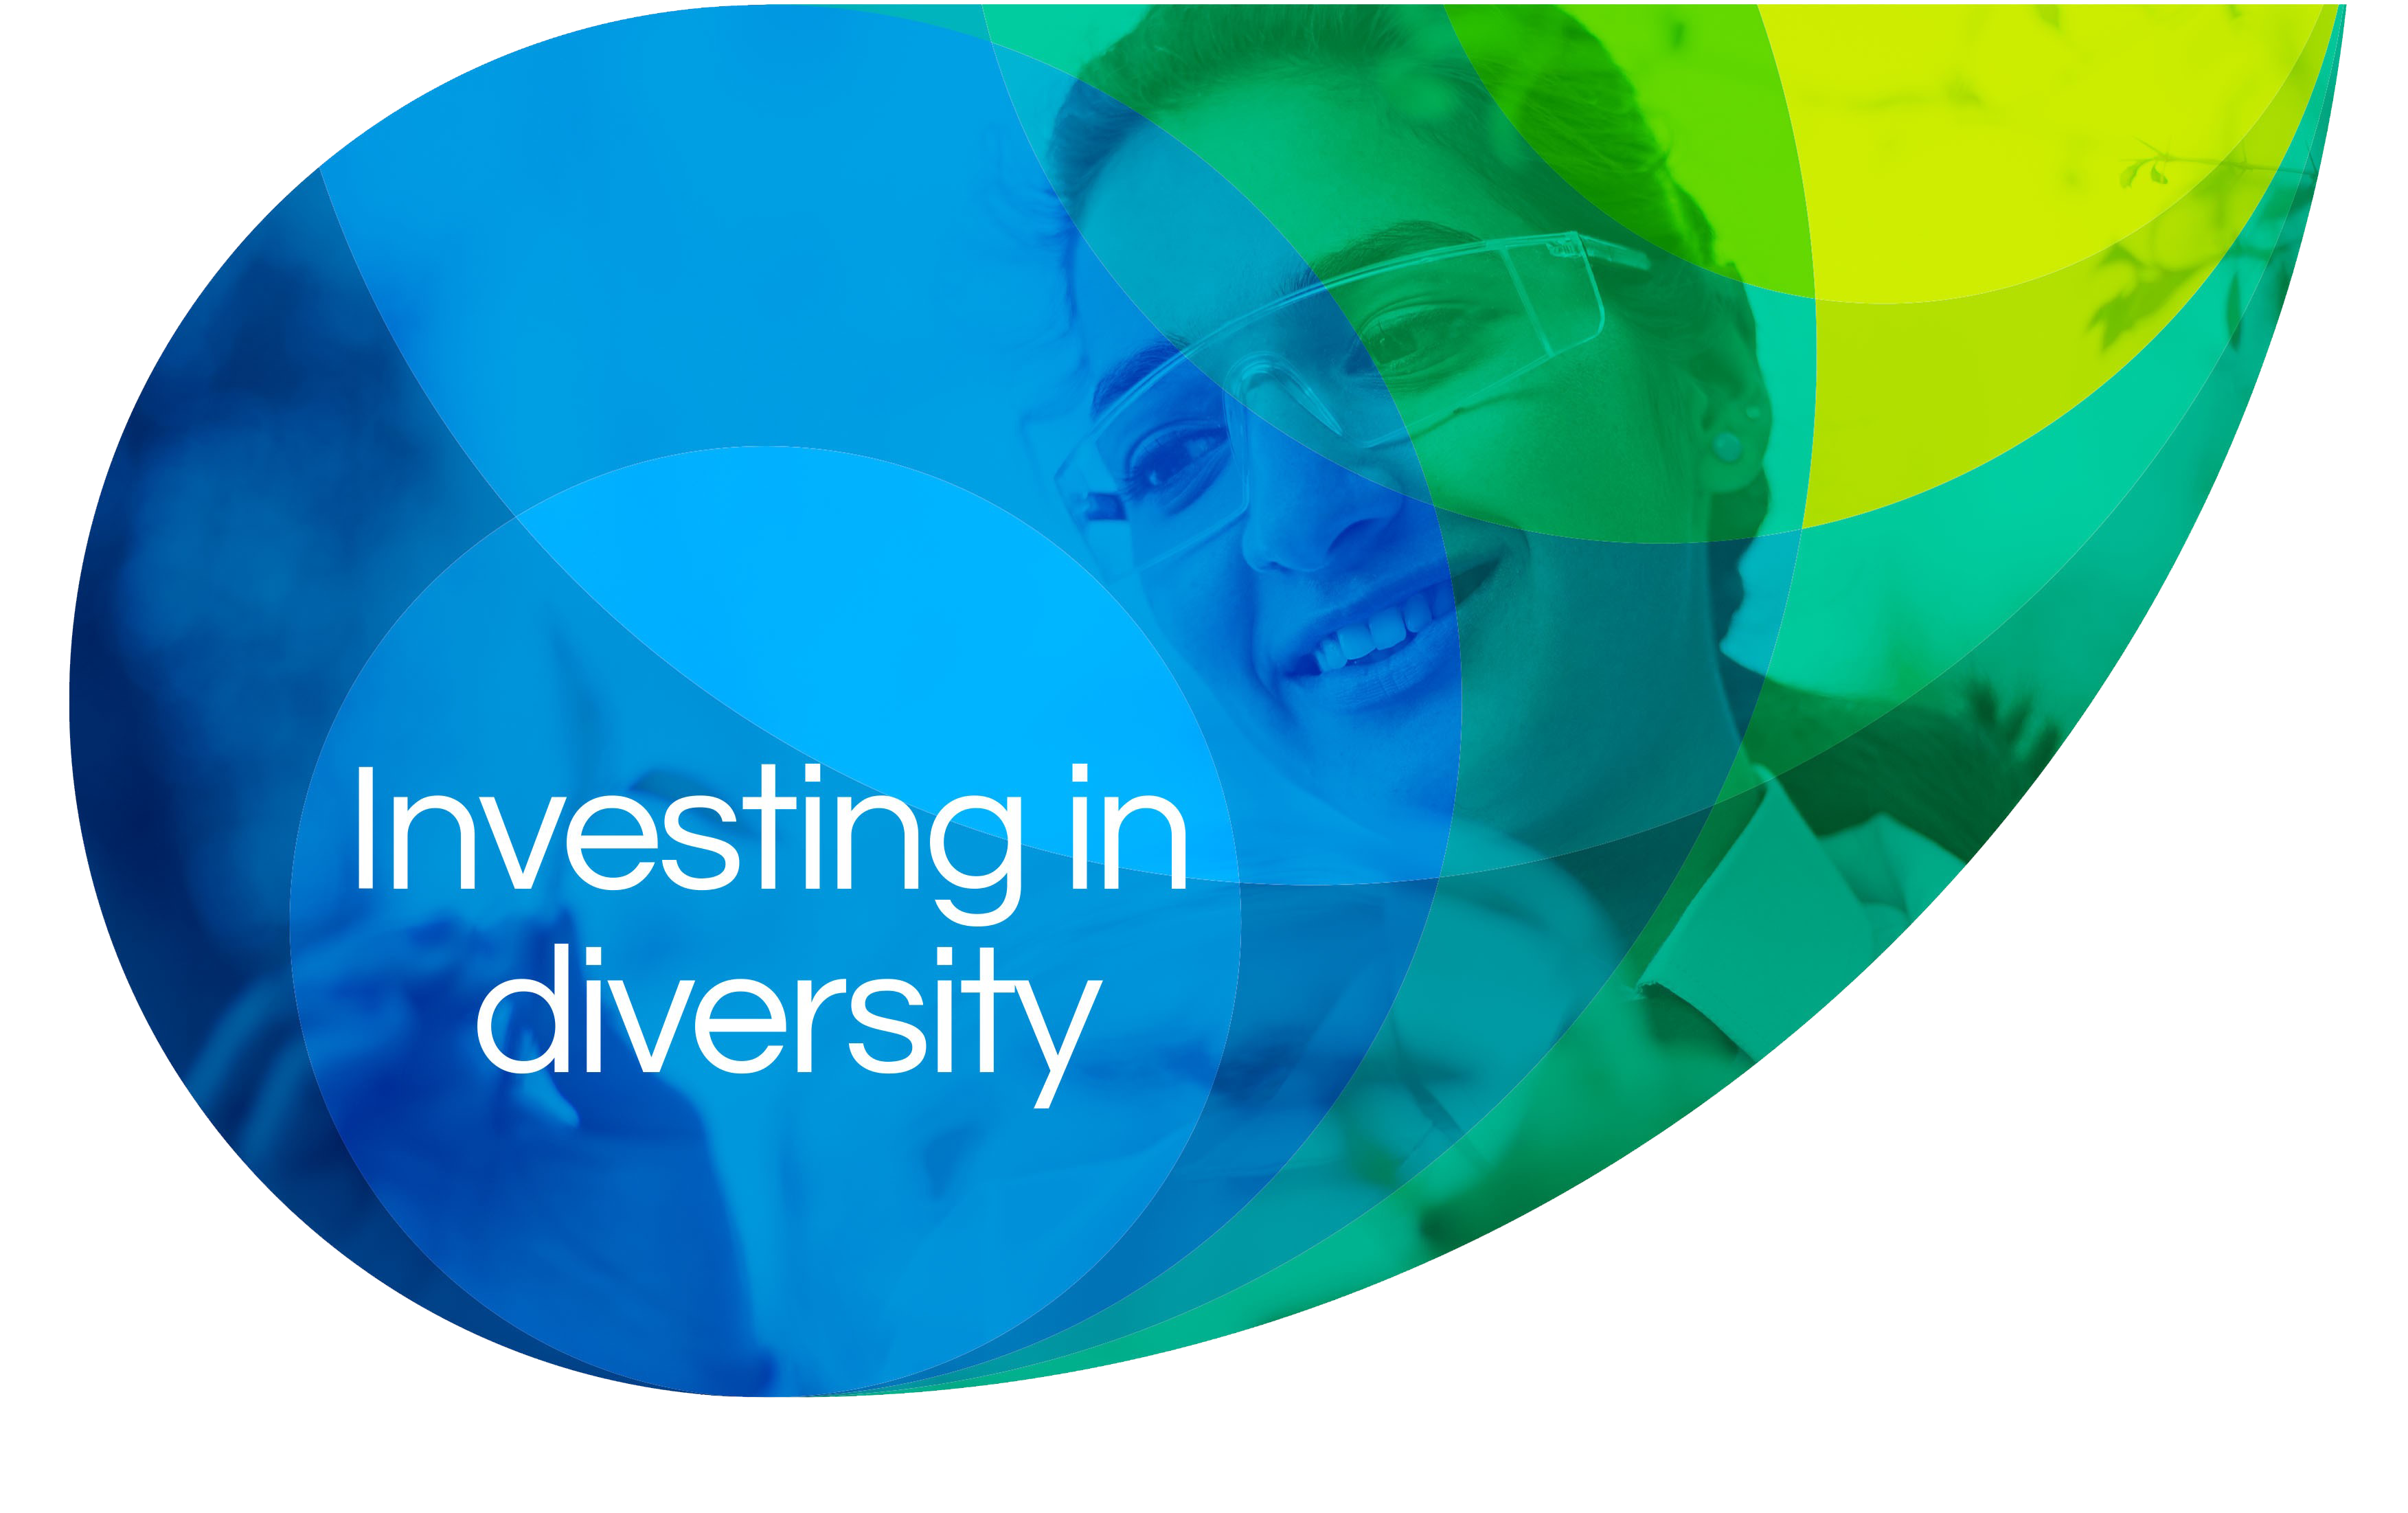 Investing in diversity - We created Sweef Capital to invest in the potential of women and the future of Southeast Asia